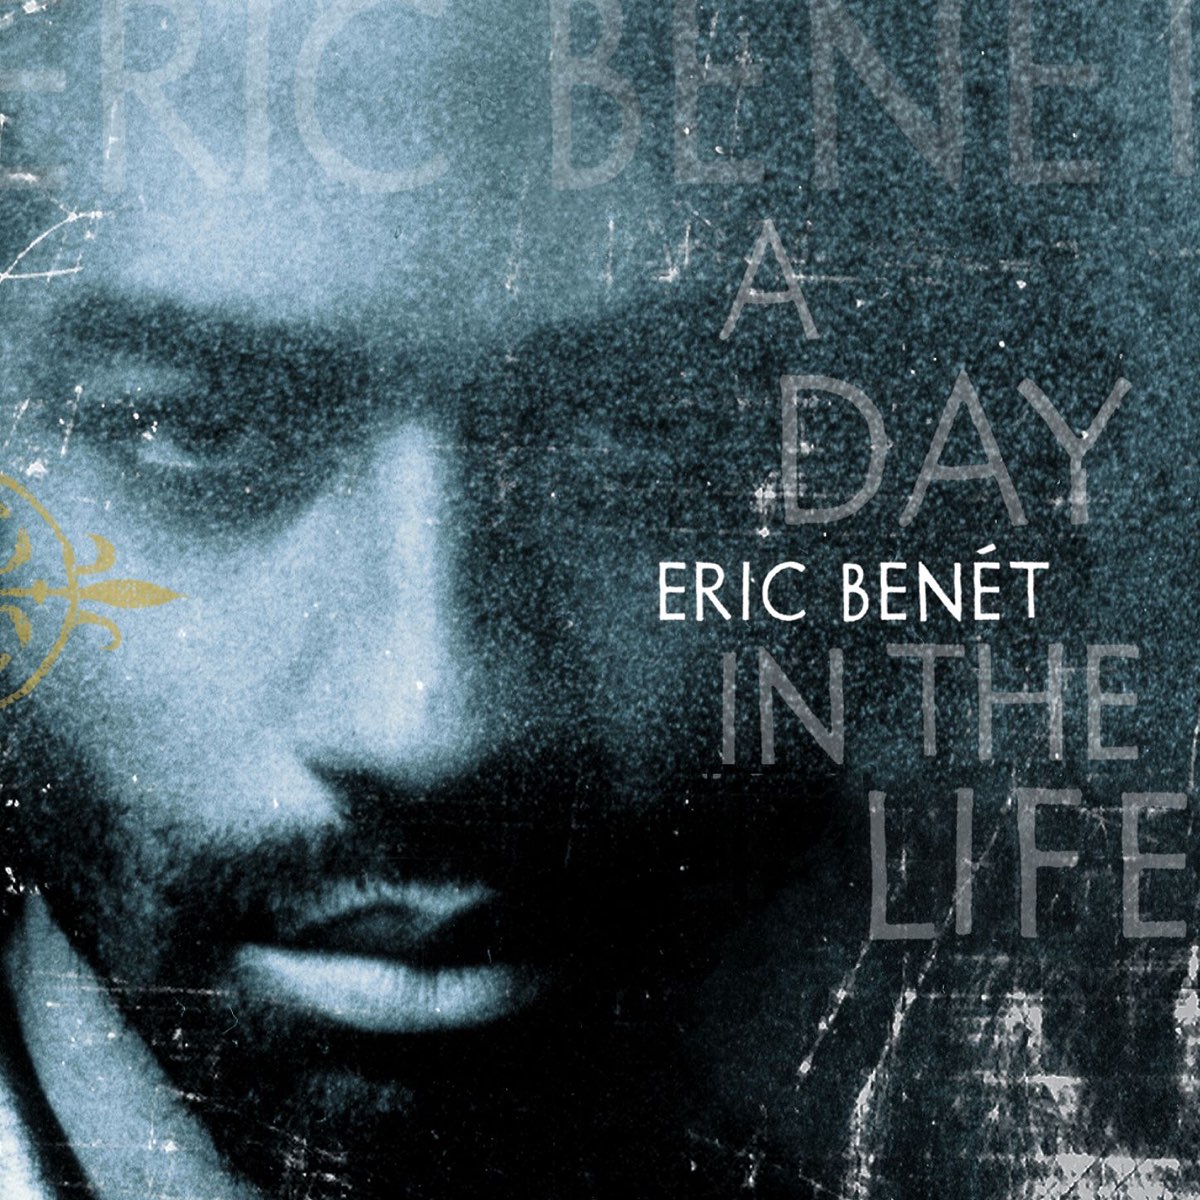 ‎a Day In The Life By Eric Benét On Apple Music